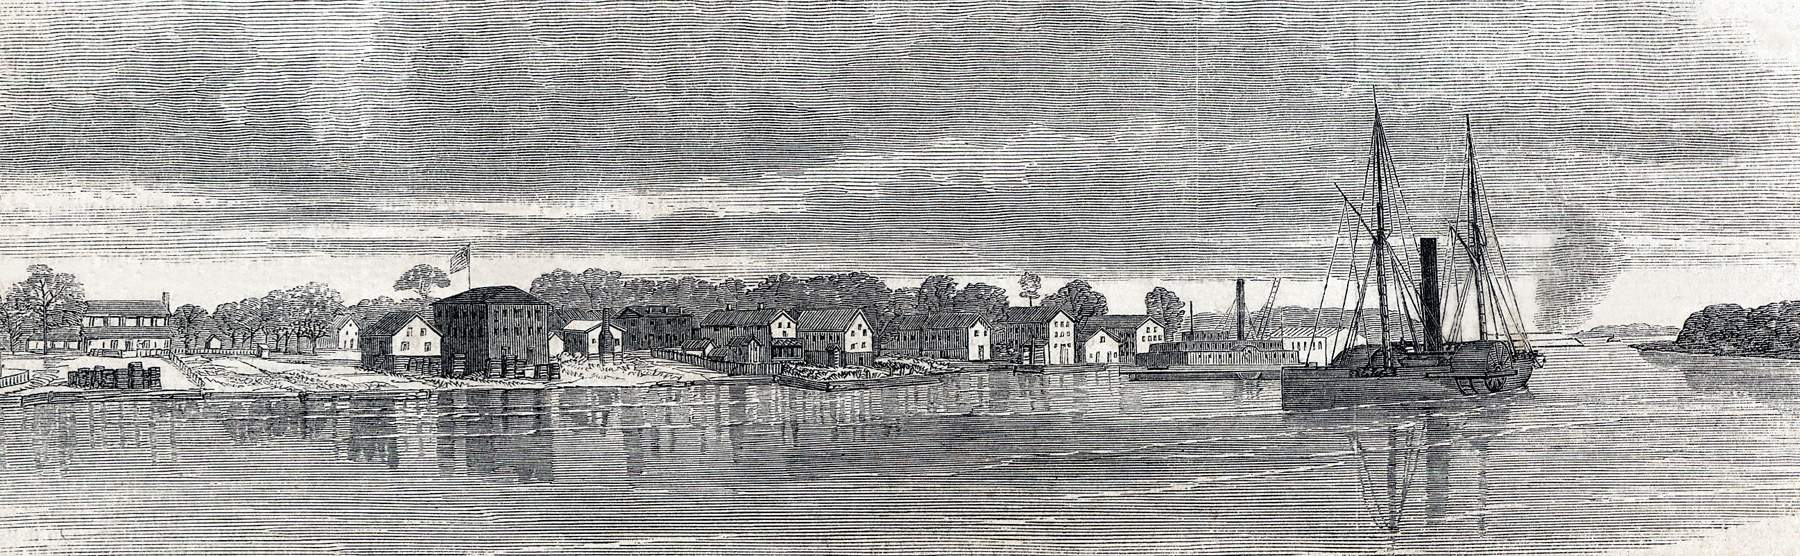 Plymouth, North Carolina, April 1864, artist's impression, zoomable image